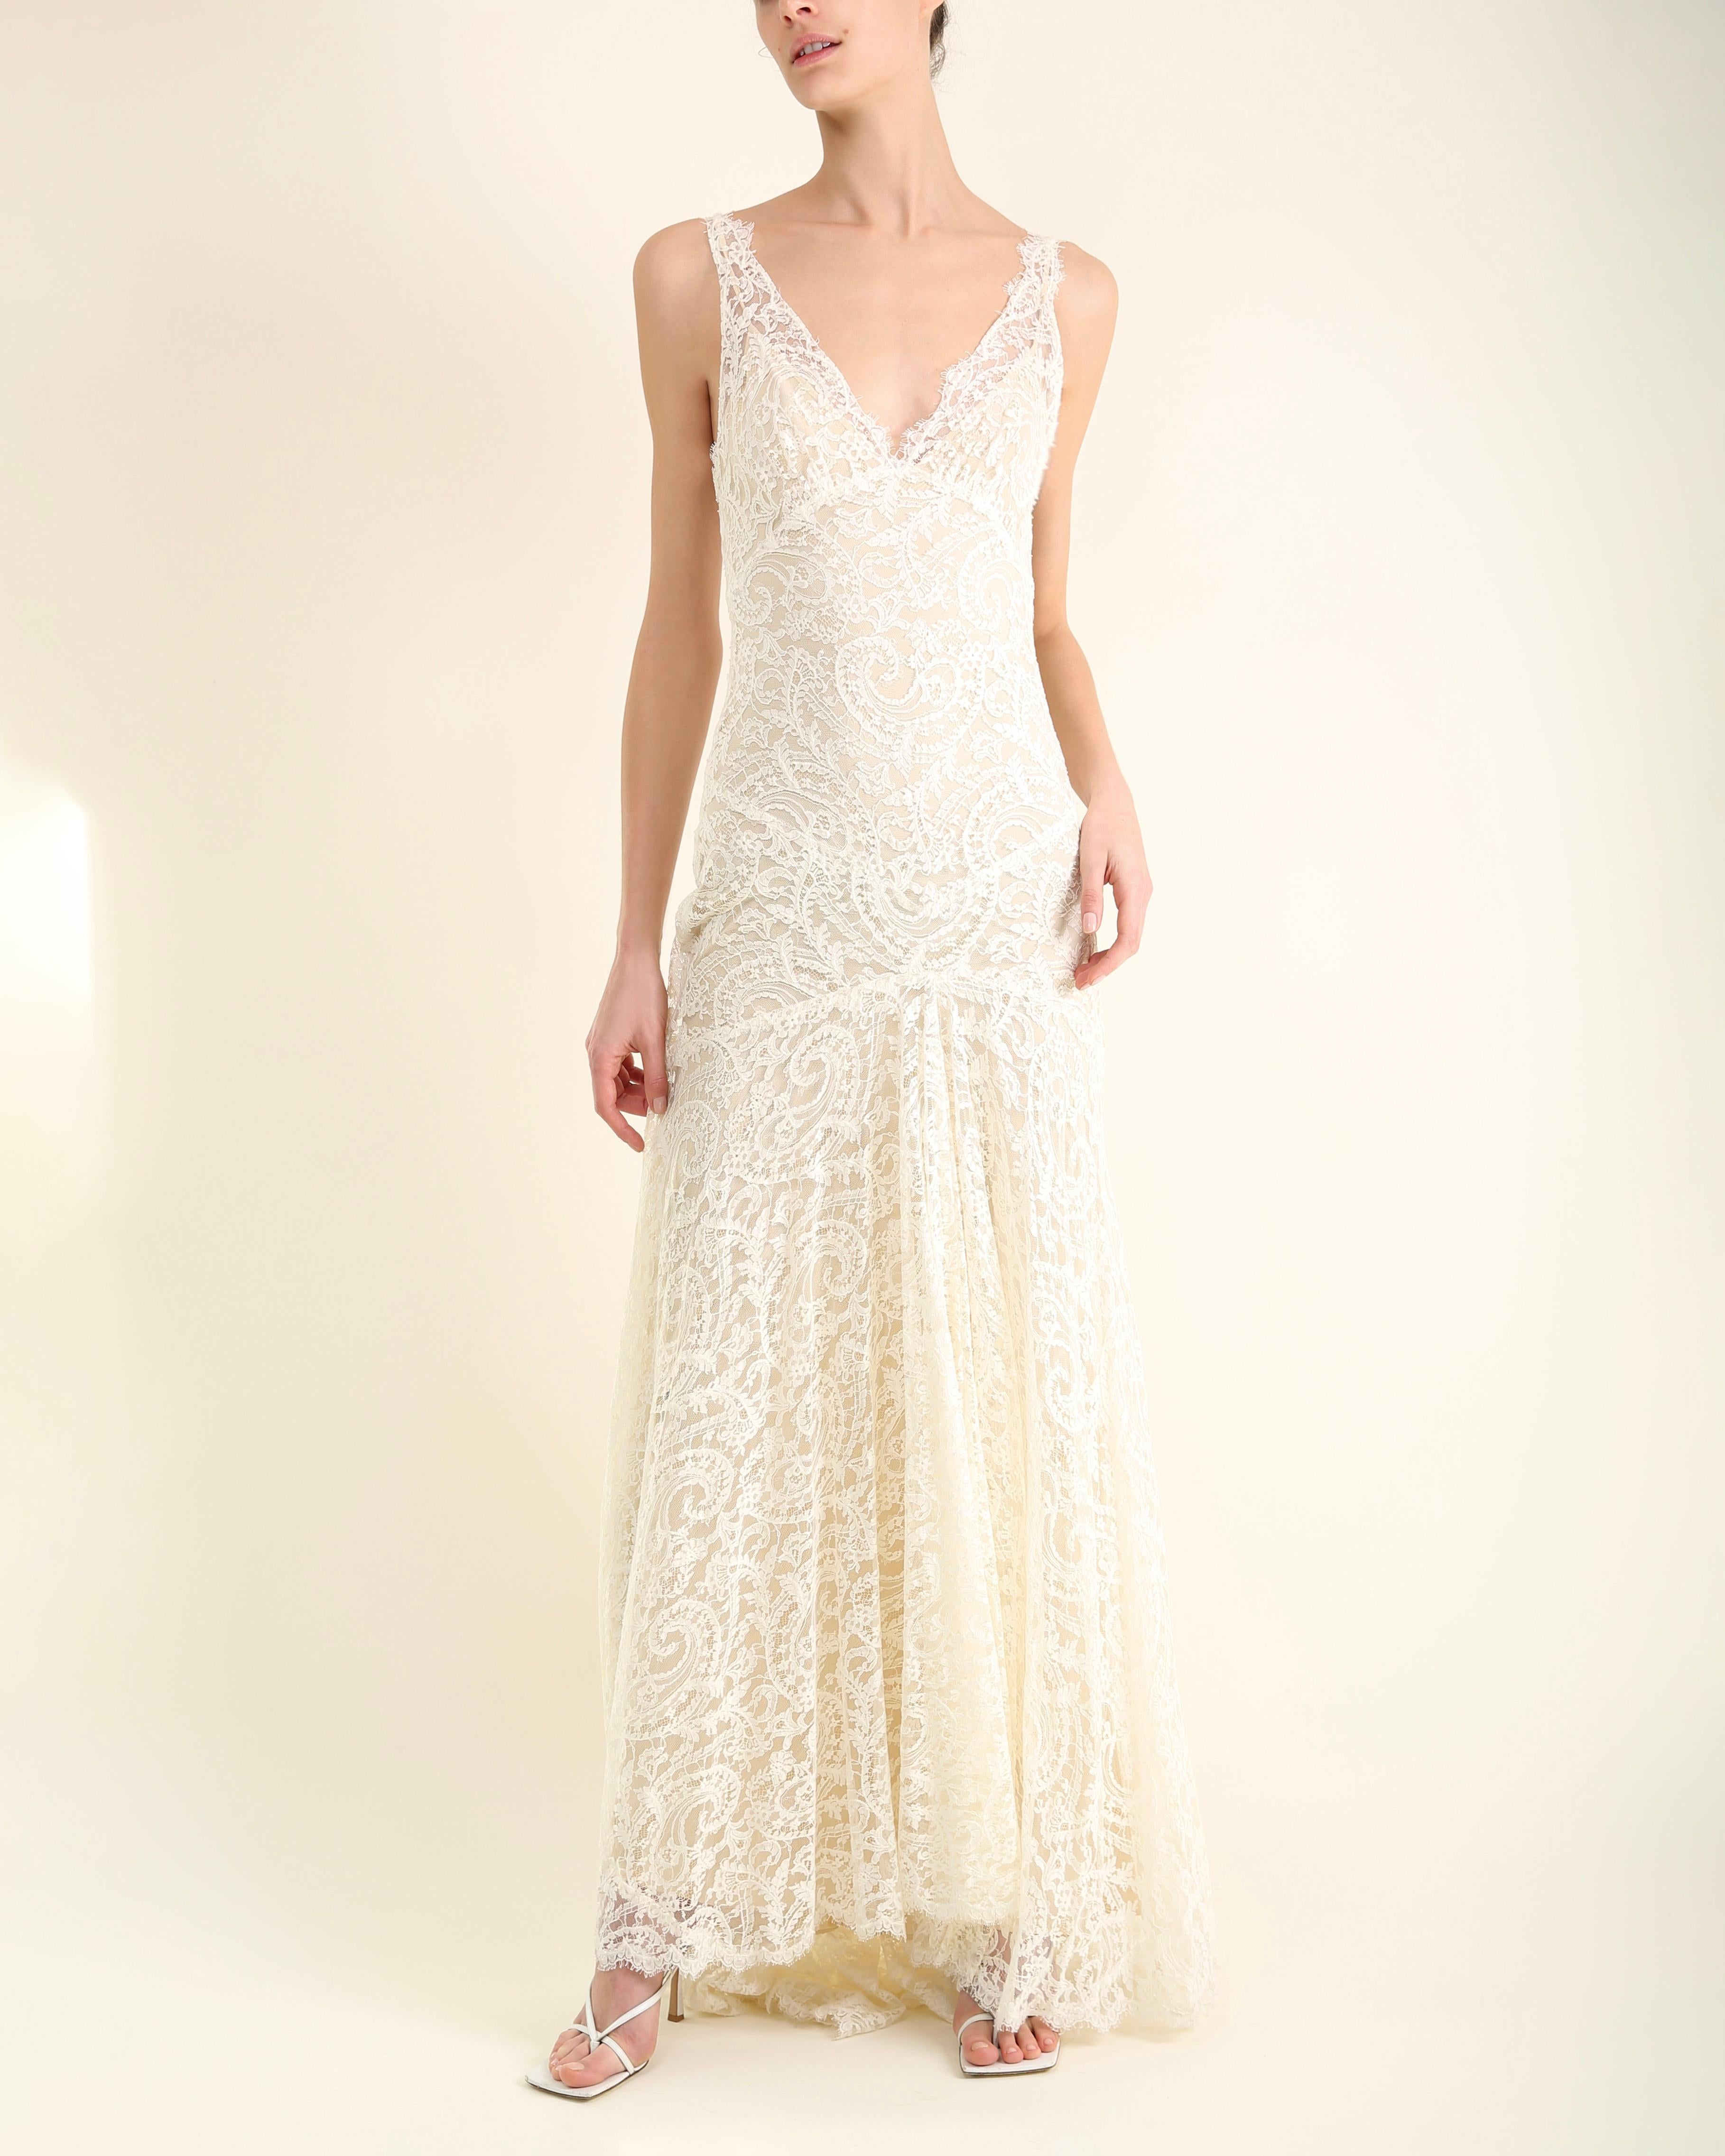 Monique Lhuillier ivory lace plunging backless wedding gown with train dress  2